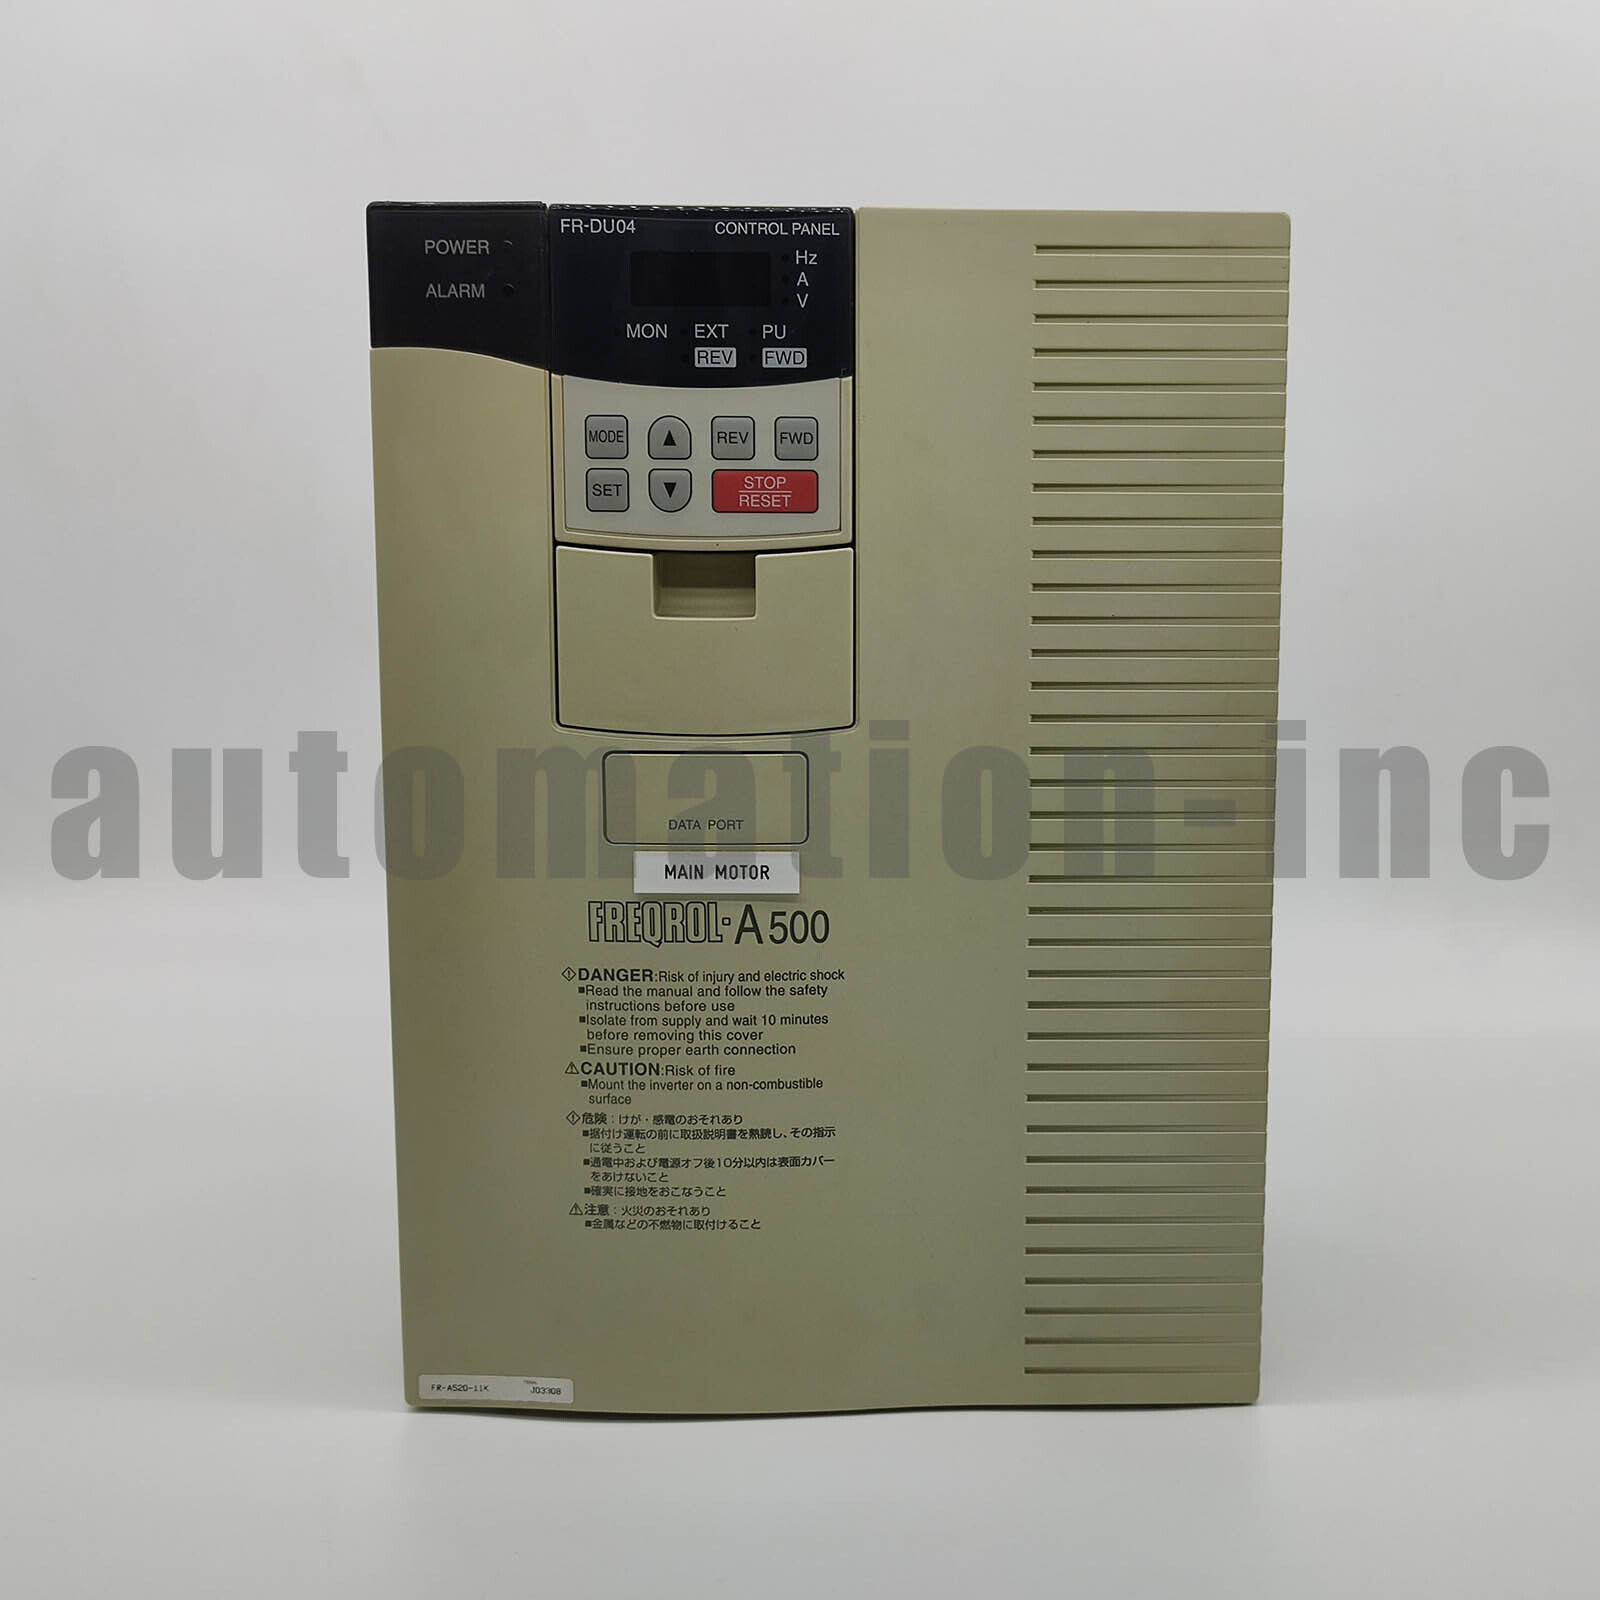 USED Mitsubishi FR-A520-11K Inverter A500 11K 220V test in good condition &AC